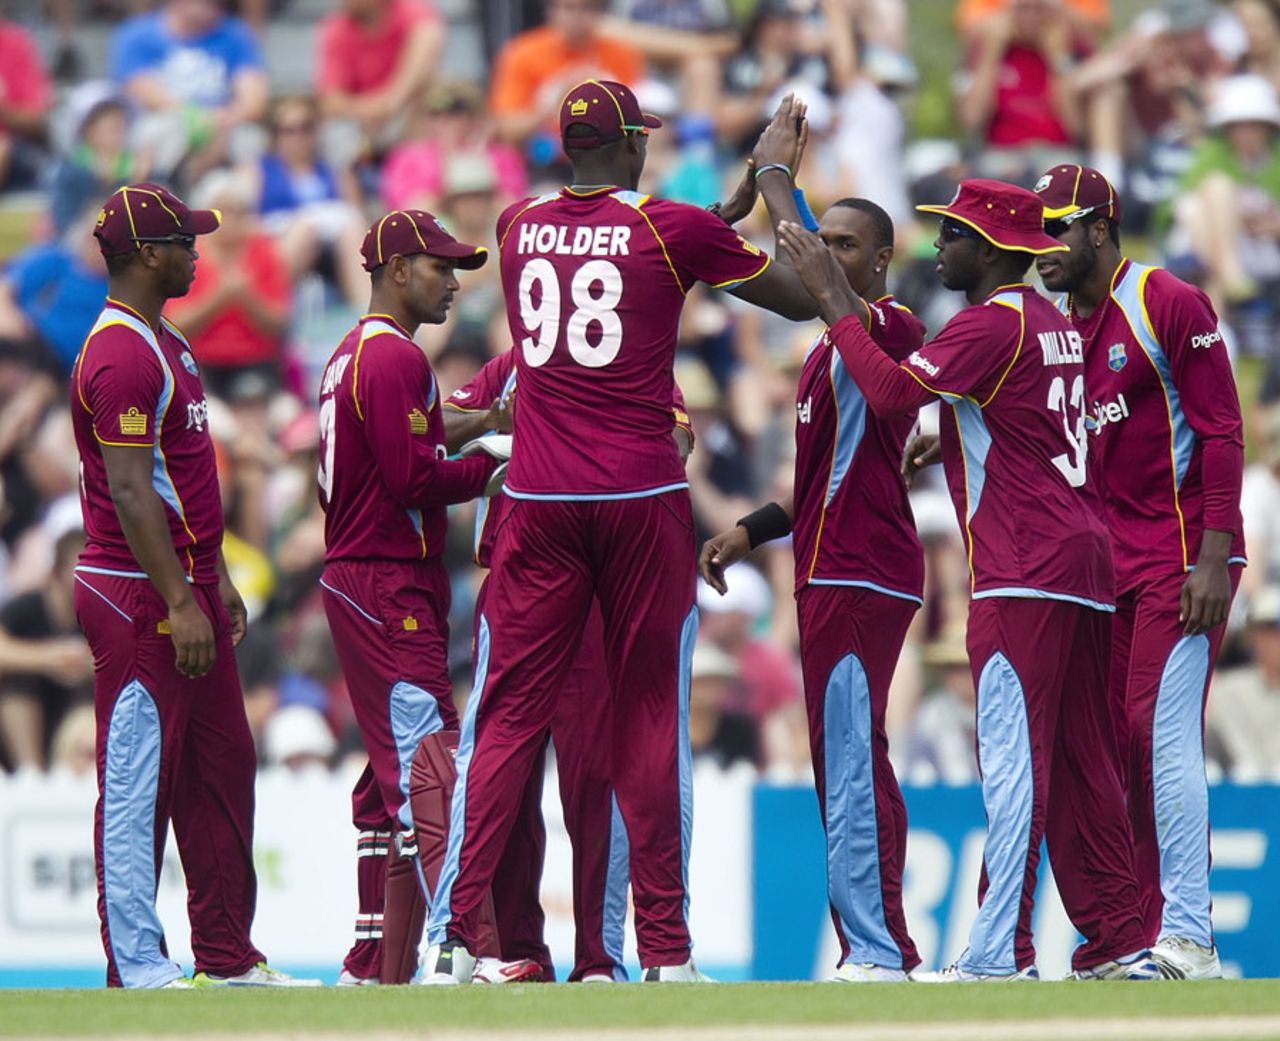 West Indies celebrate the wicket of Jesse Ryder, New Zealand v West Indies, 4th ODI, Nelson, January 4, 2014